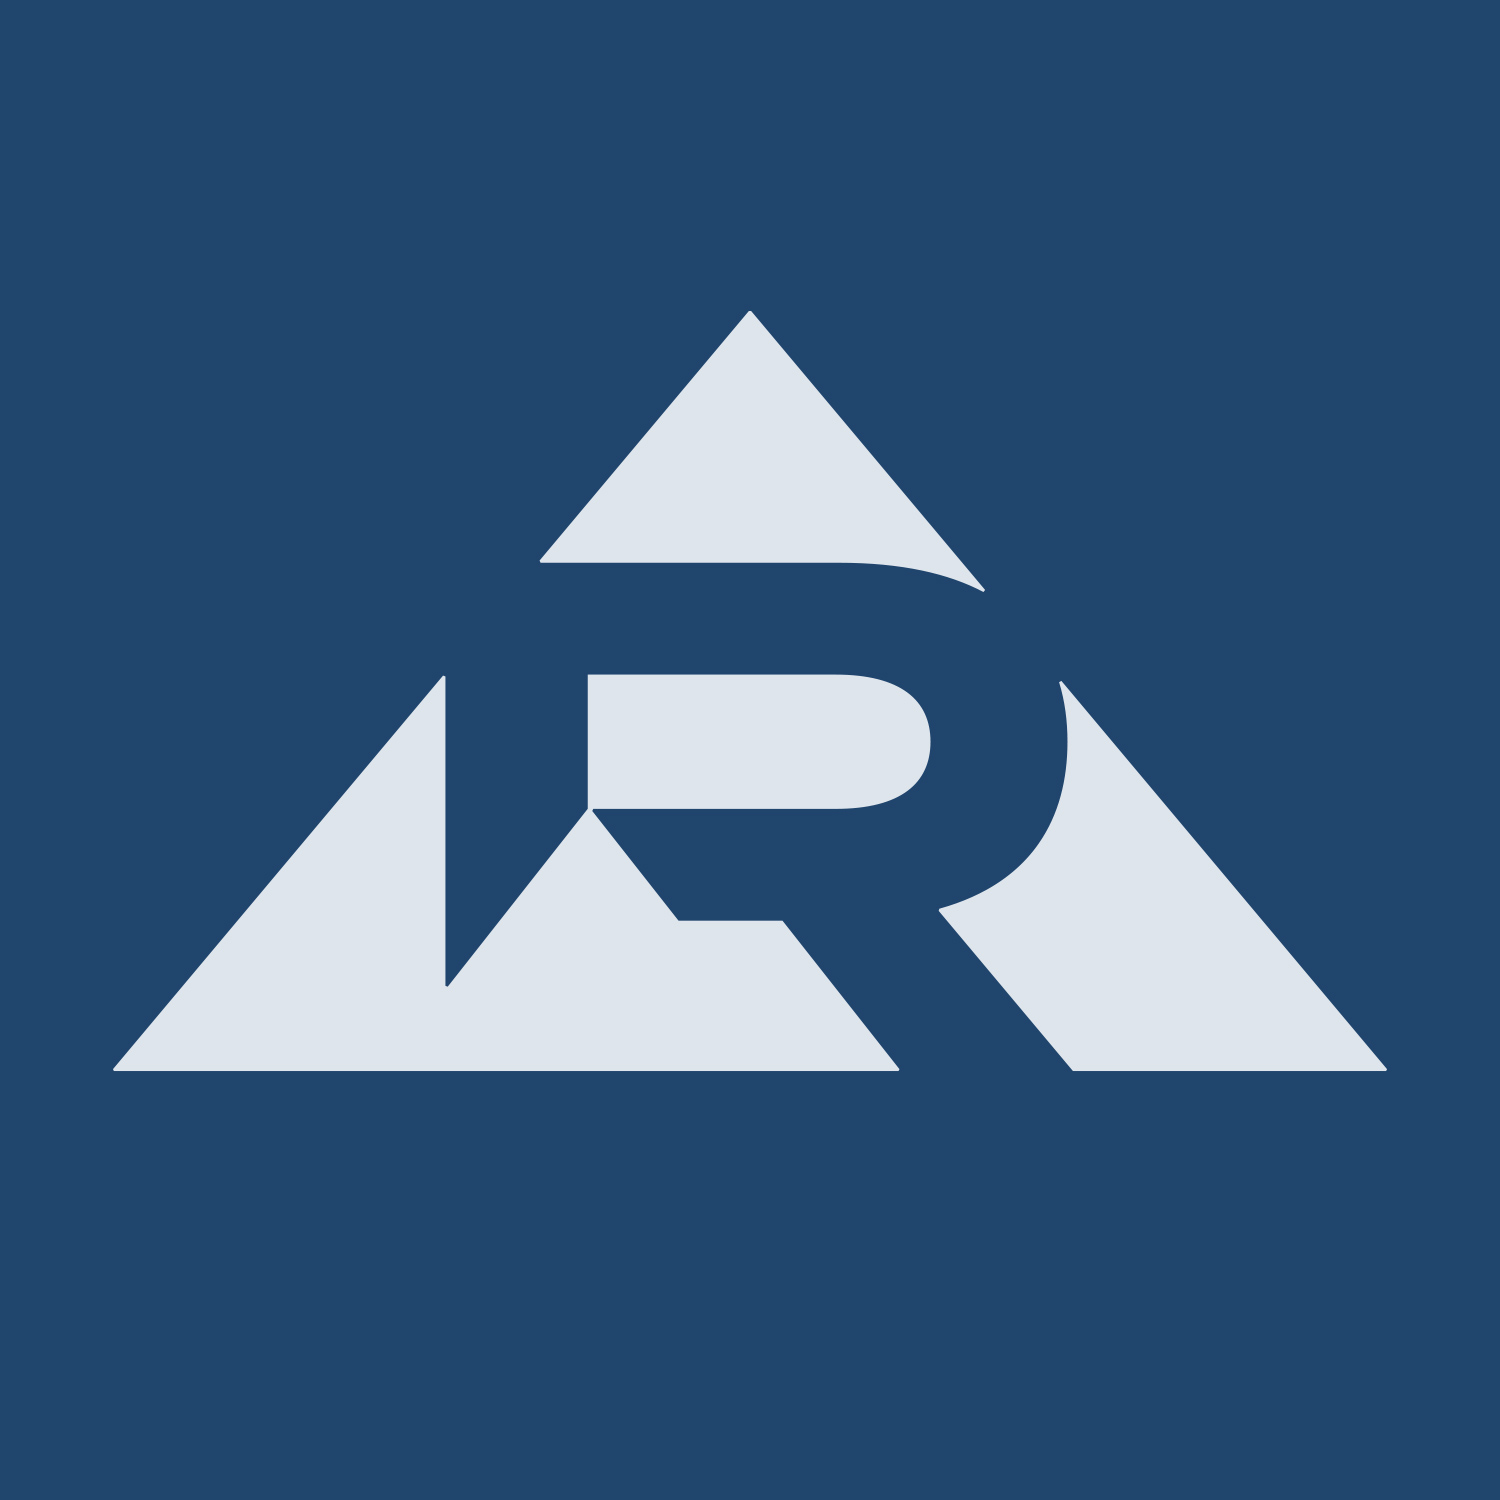 Triangle icon with the letter 'R'